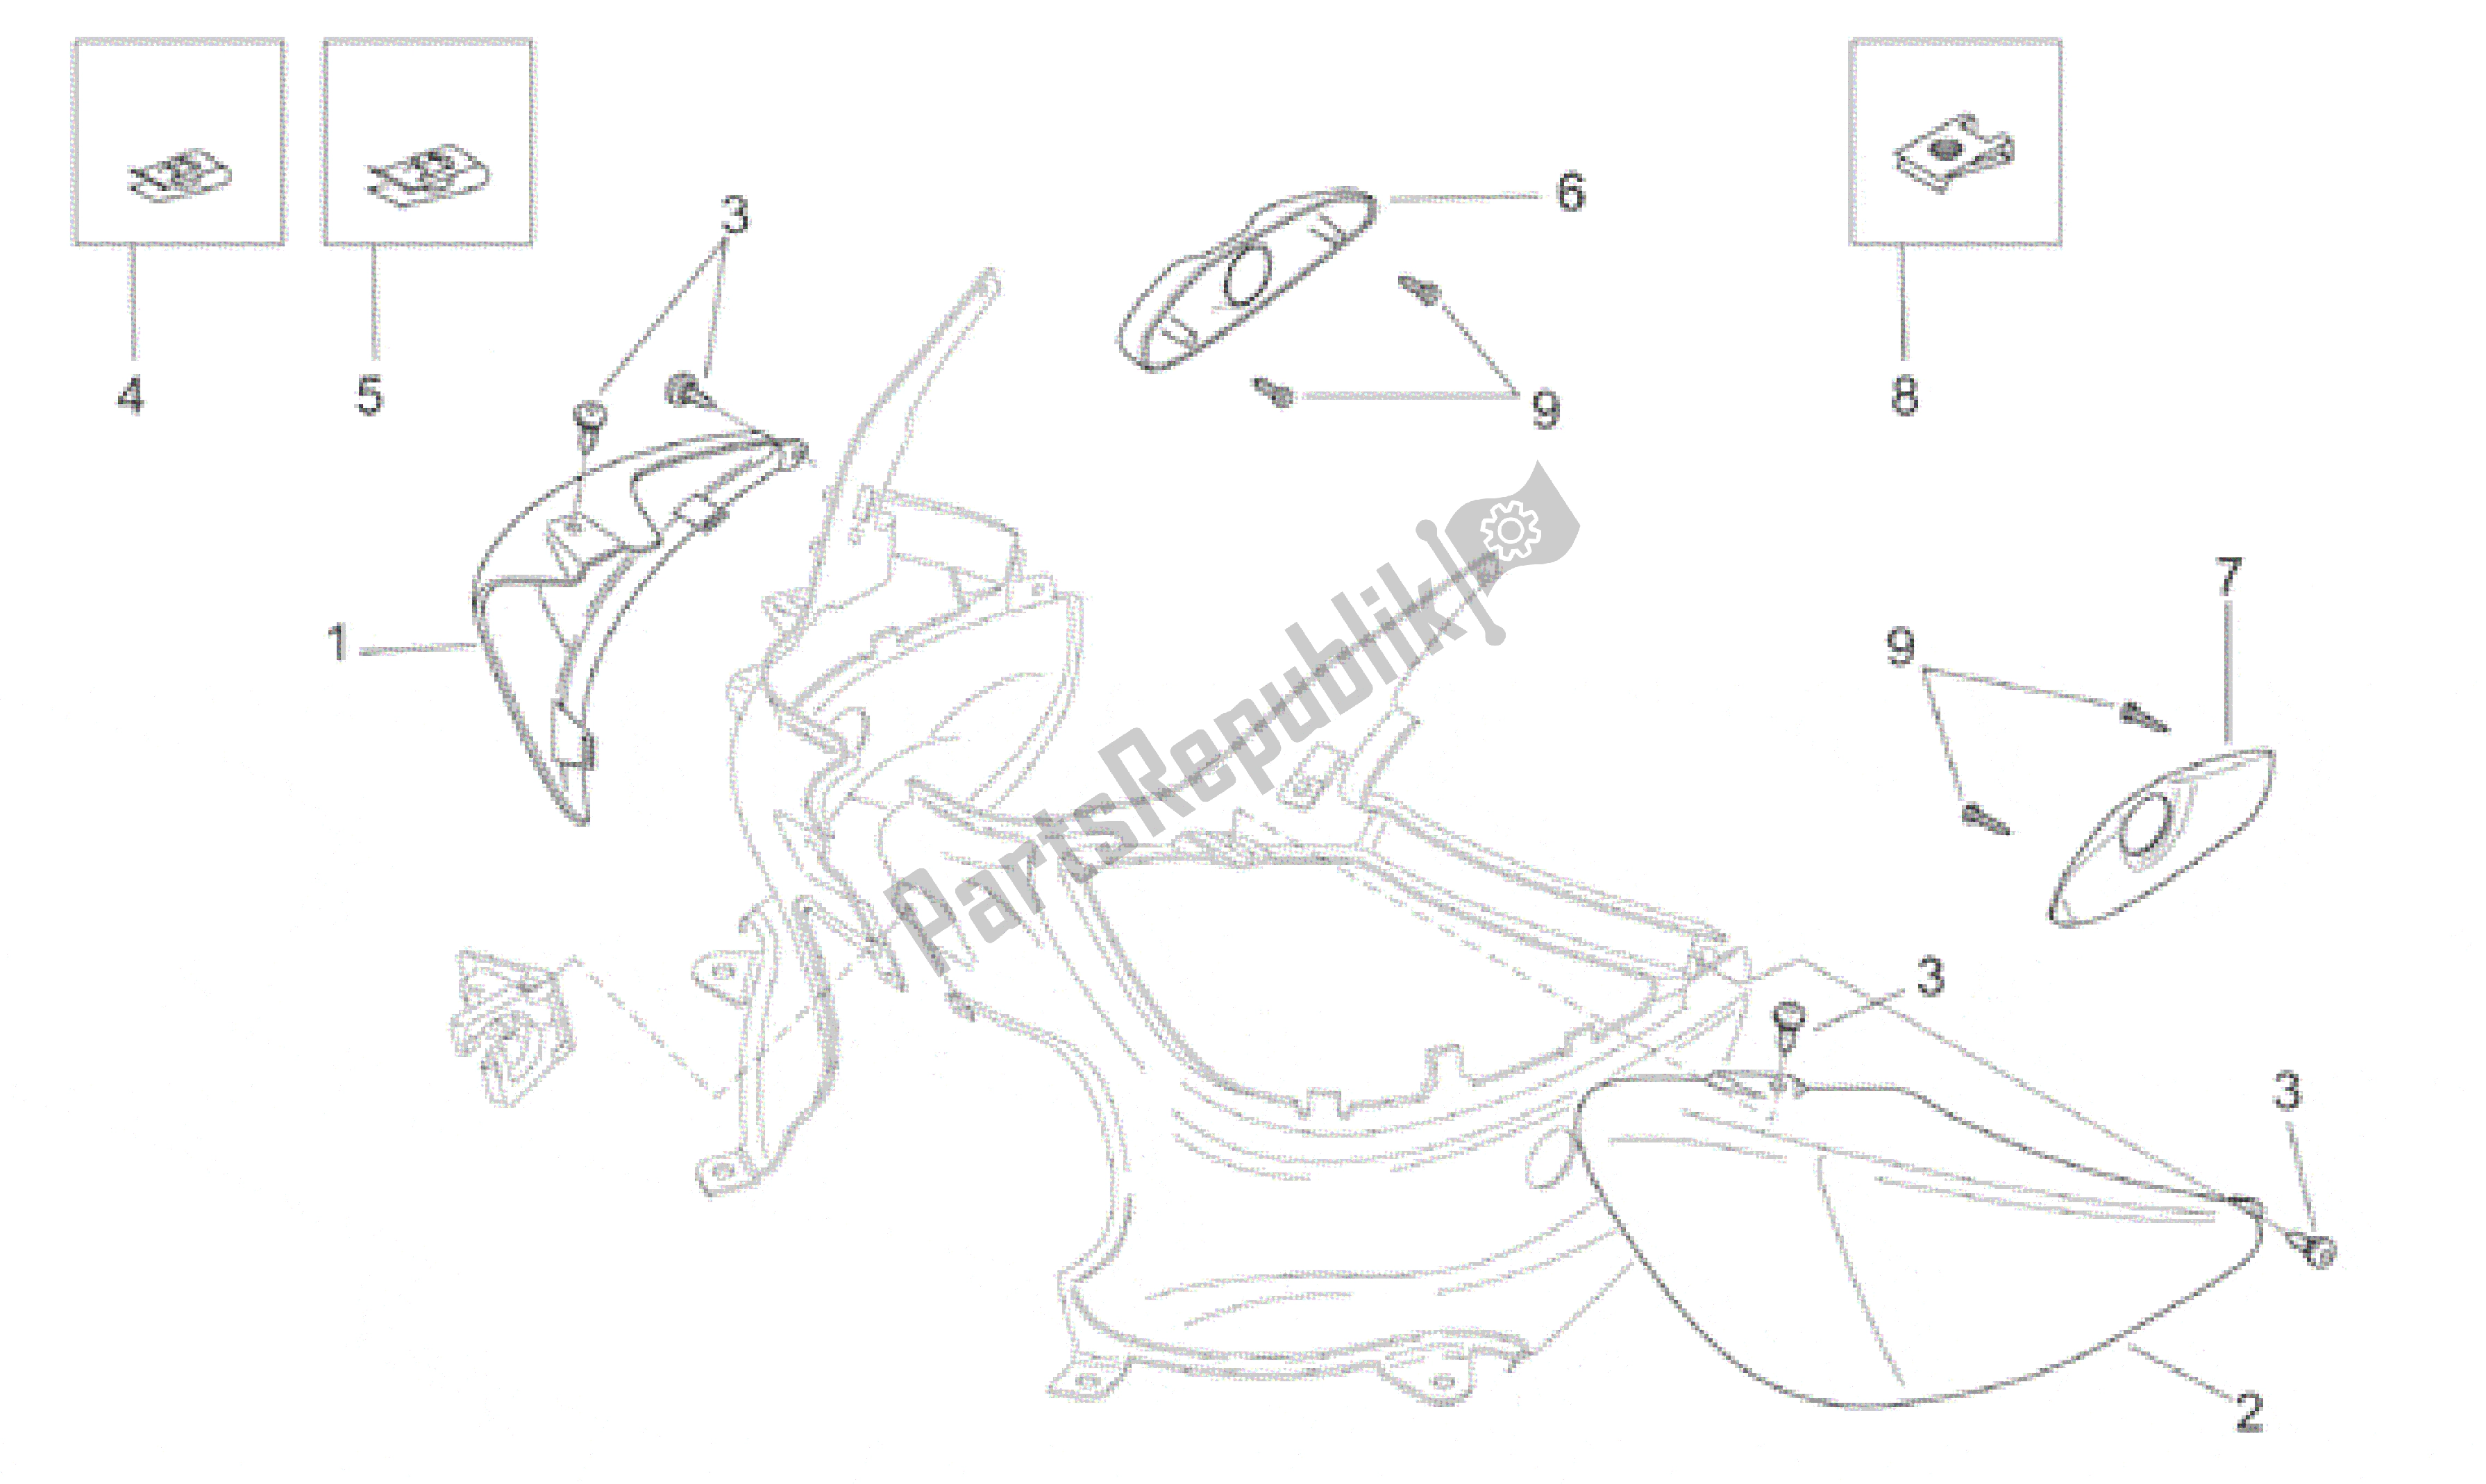 All parts for the Rear Body  - Undersaddle of the Aprilia Habana 125 1999 - 2001